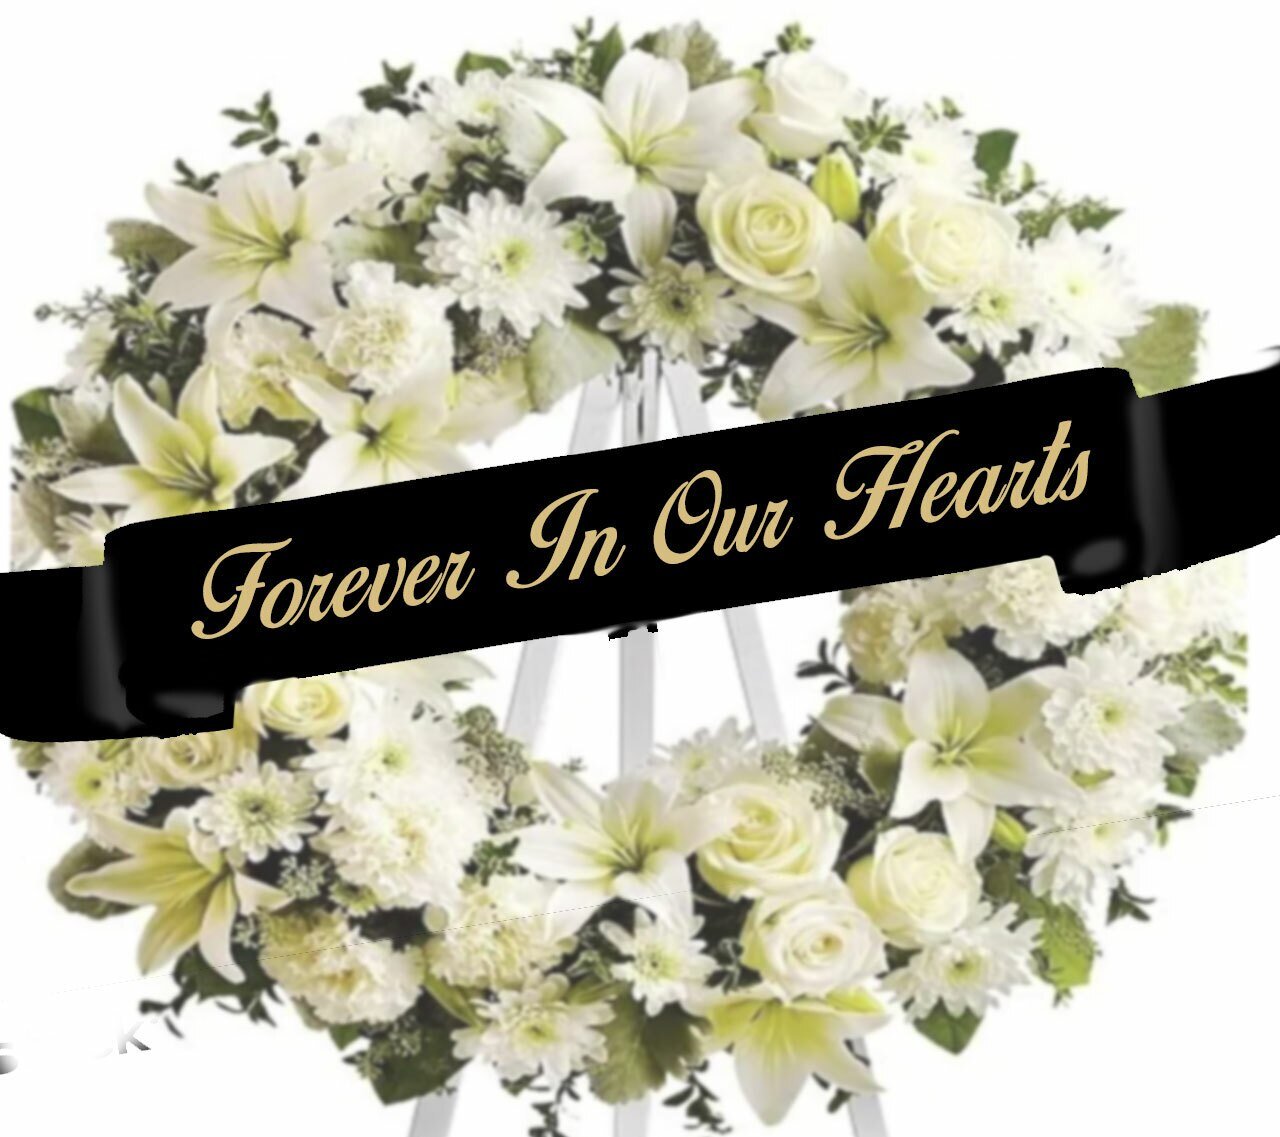 Forever In Our Hearts Funeral Ribbon Banner For Flowers.